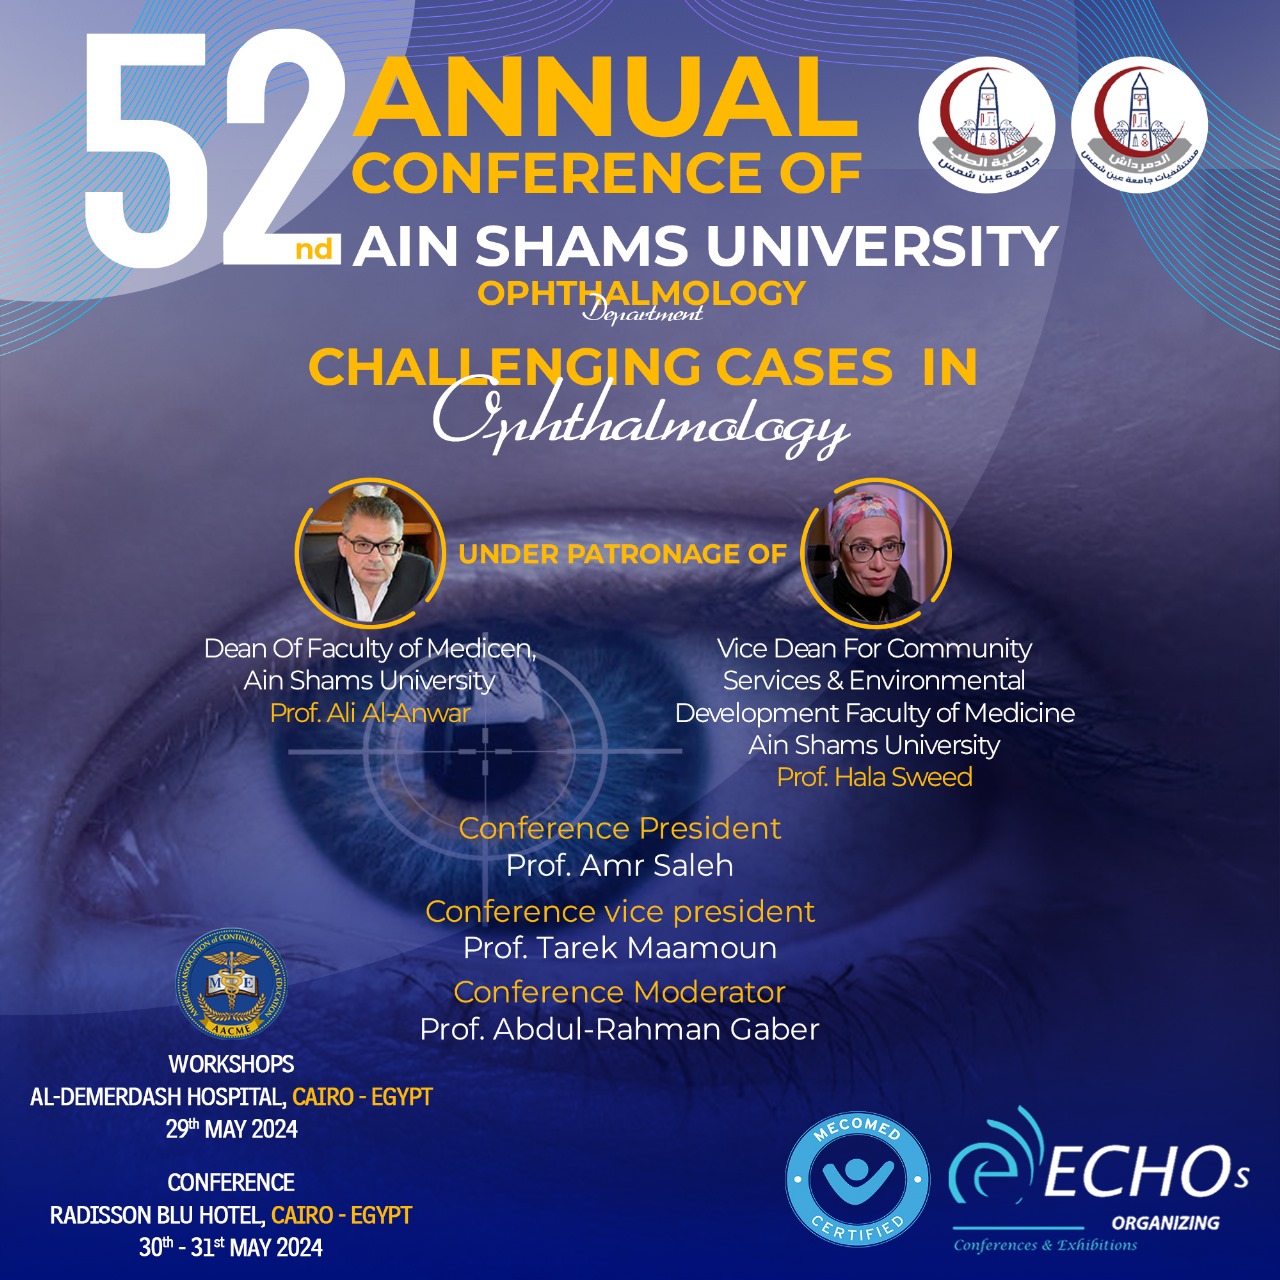 52 ANNUAL CONFERENCE OF AIN SHAMS UNIVERSITY